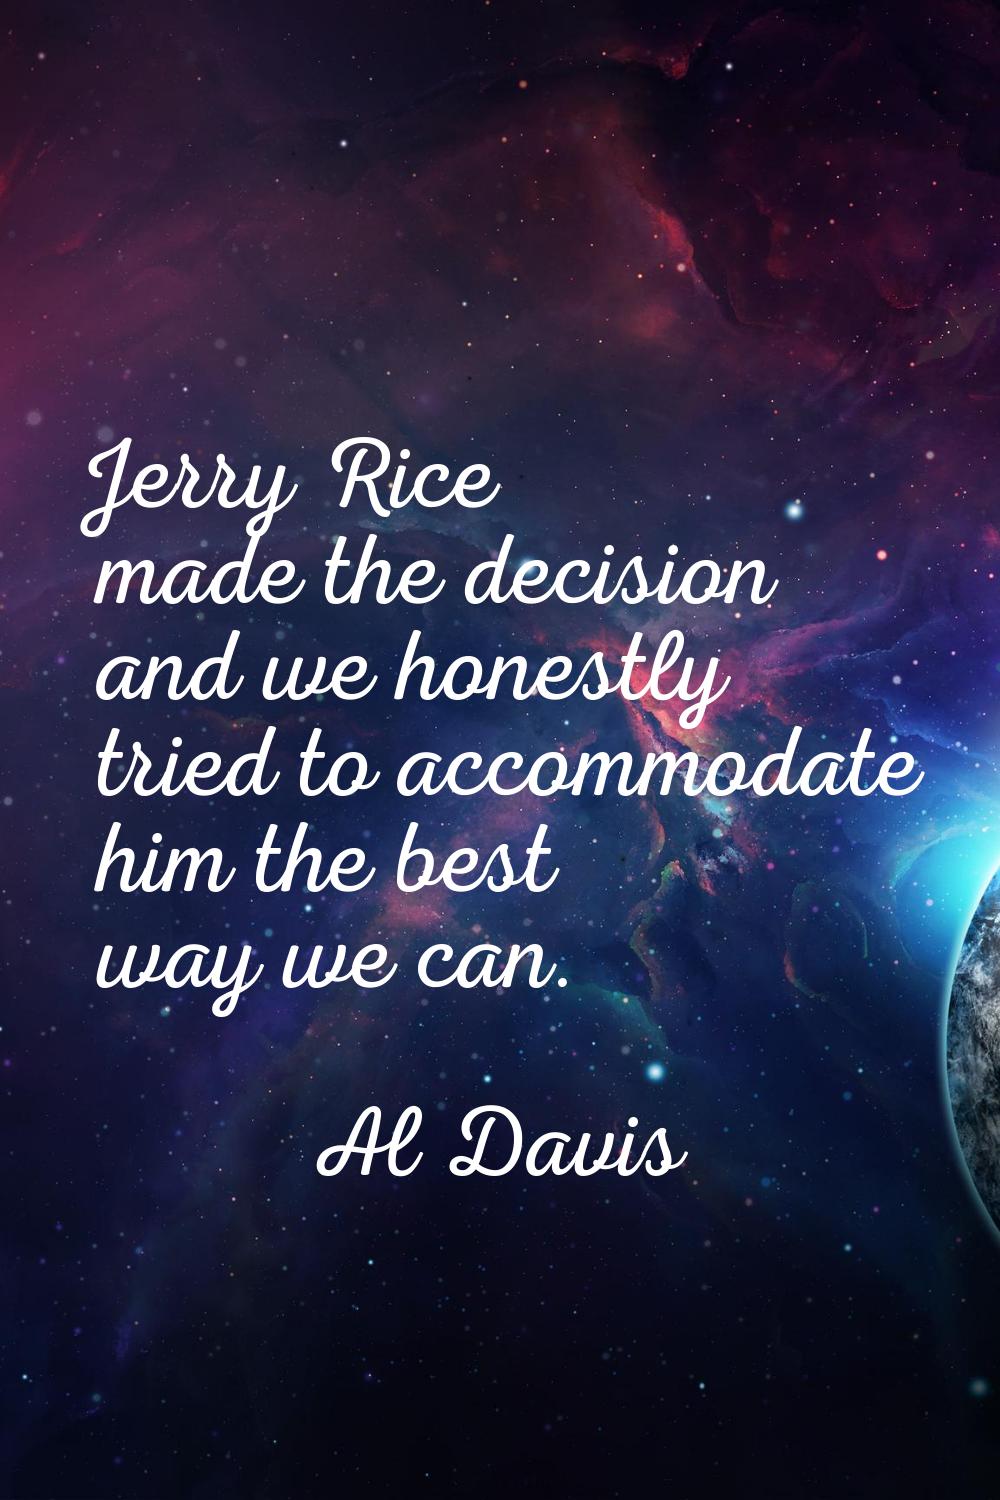 Jerry Rice made the decision and we honestly tried to accommodate him the best way we can.